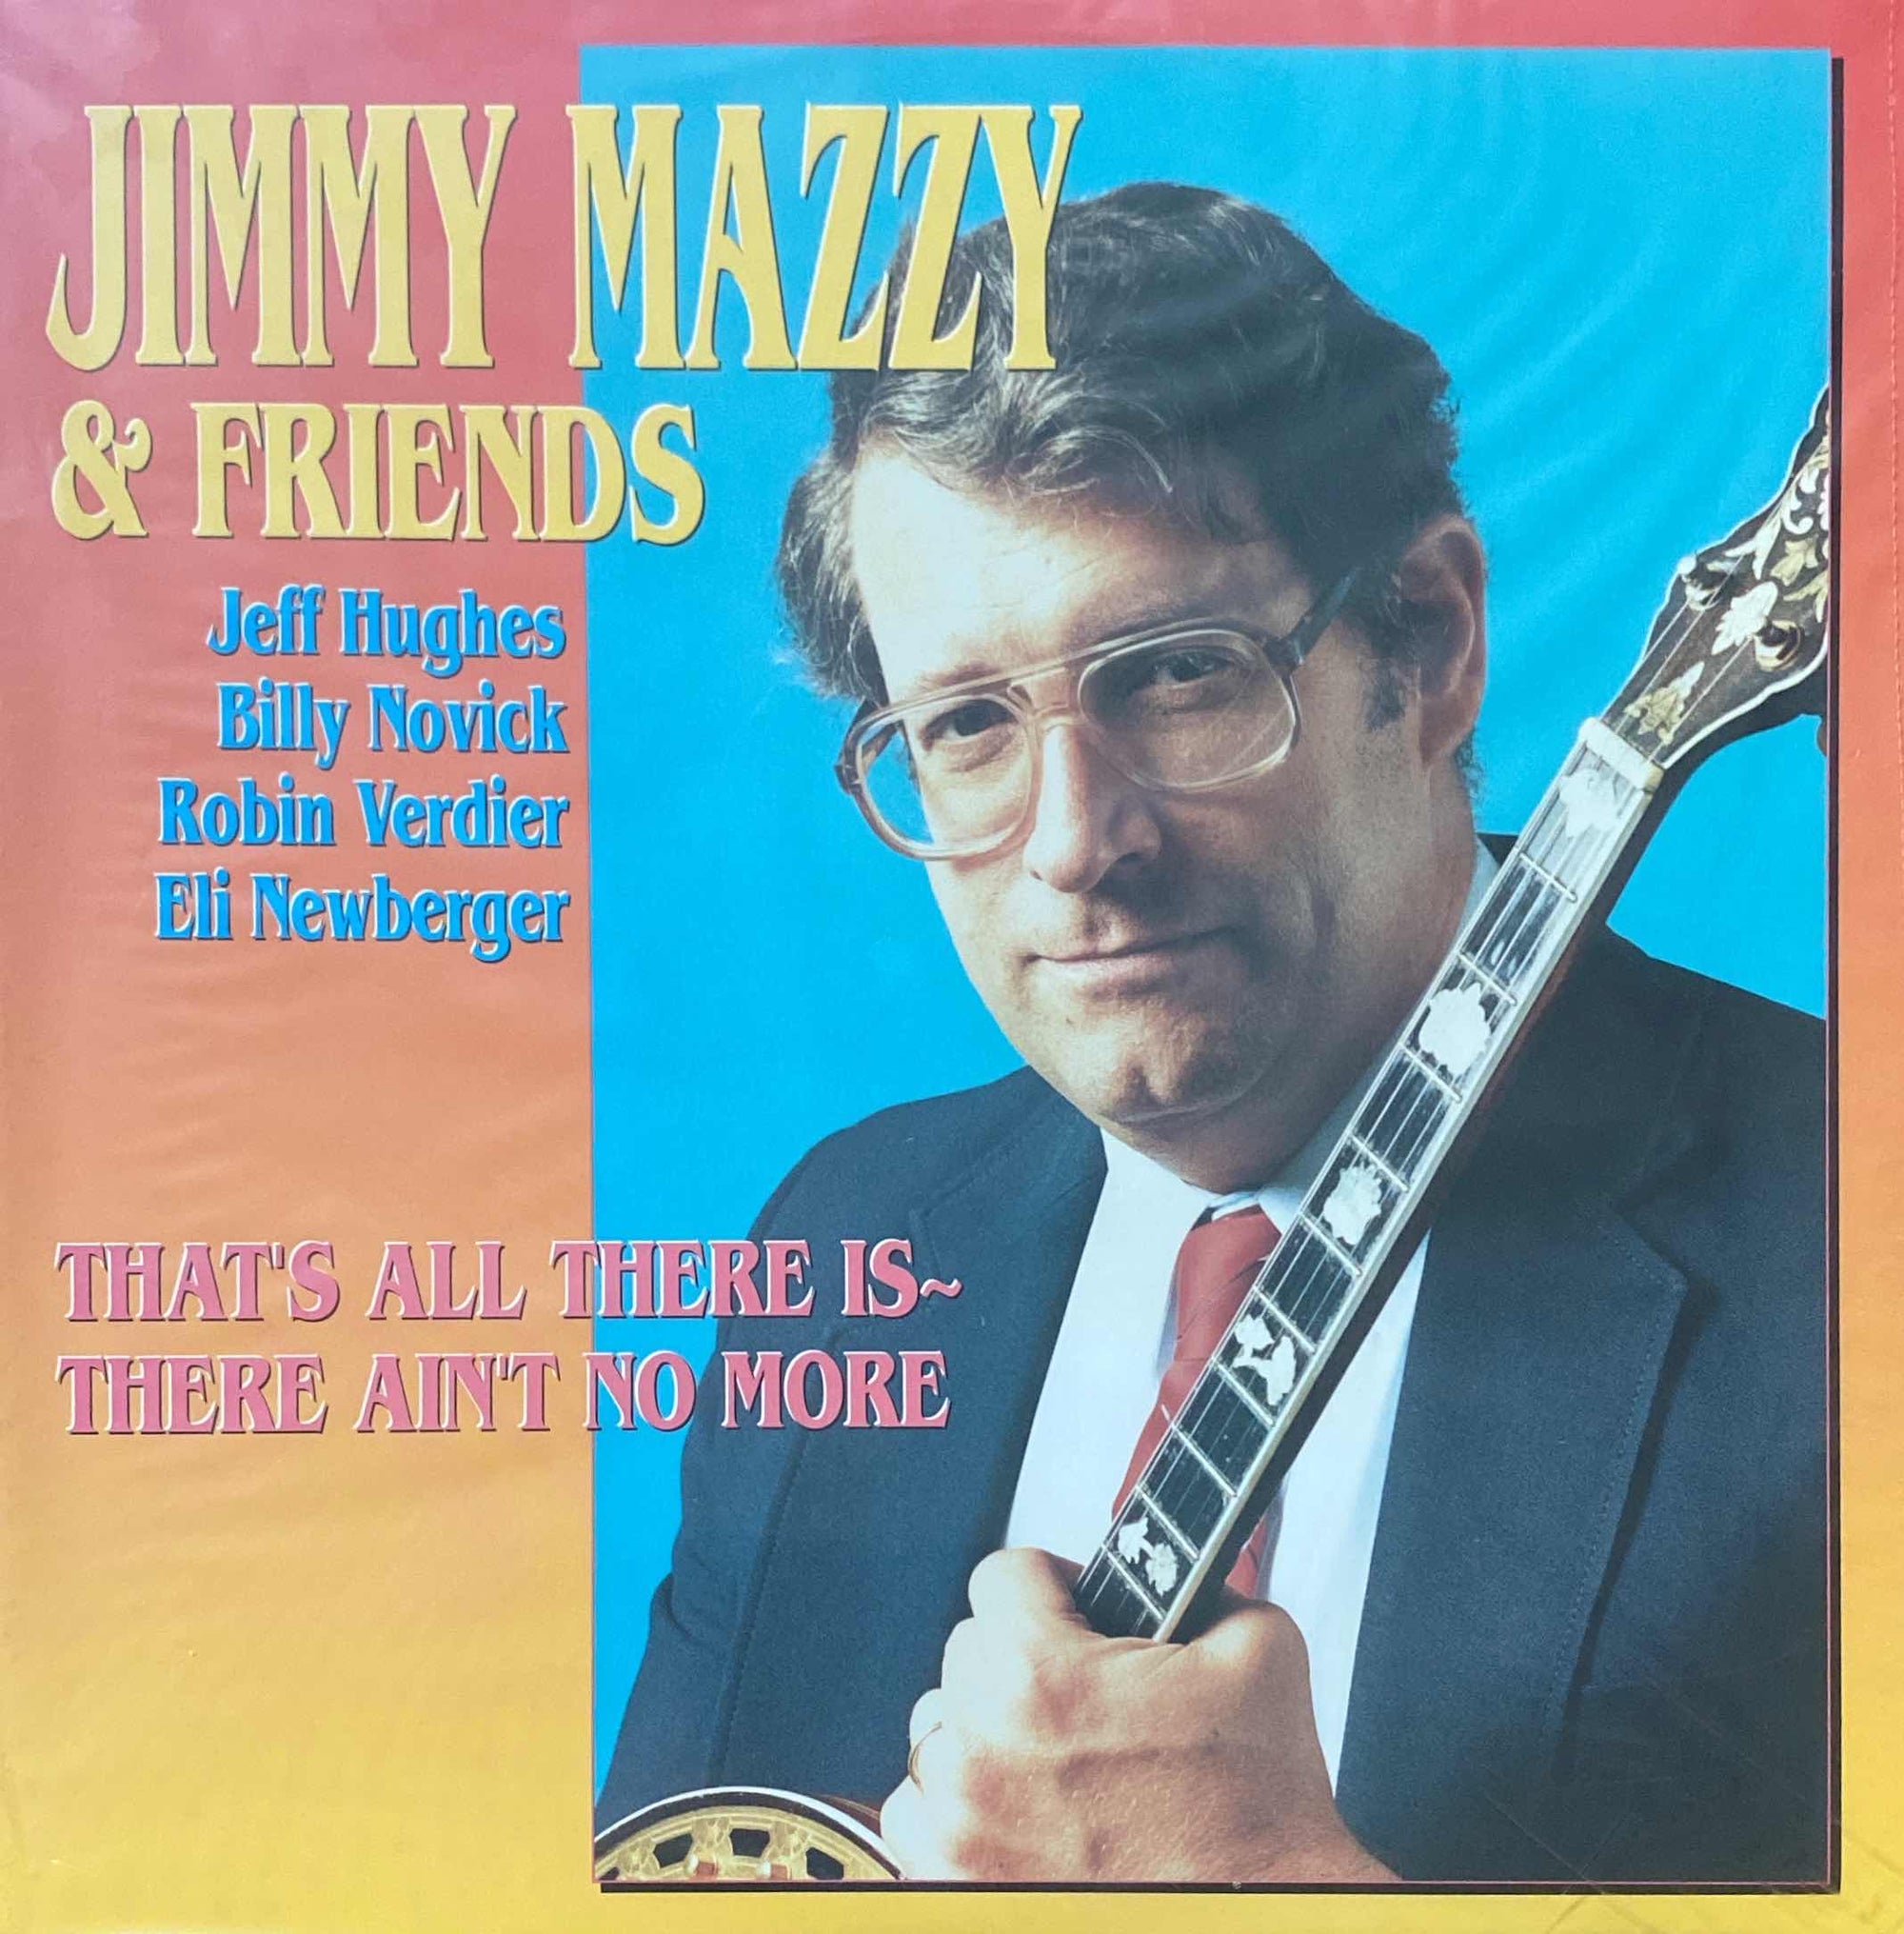 Jimmy Mazzy and Friends- That's All There Is...There Ain't No More